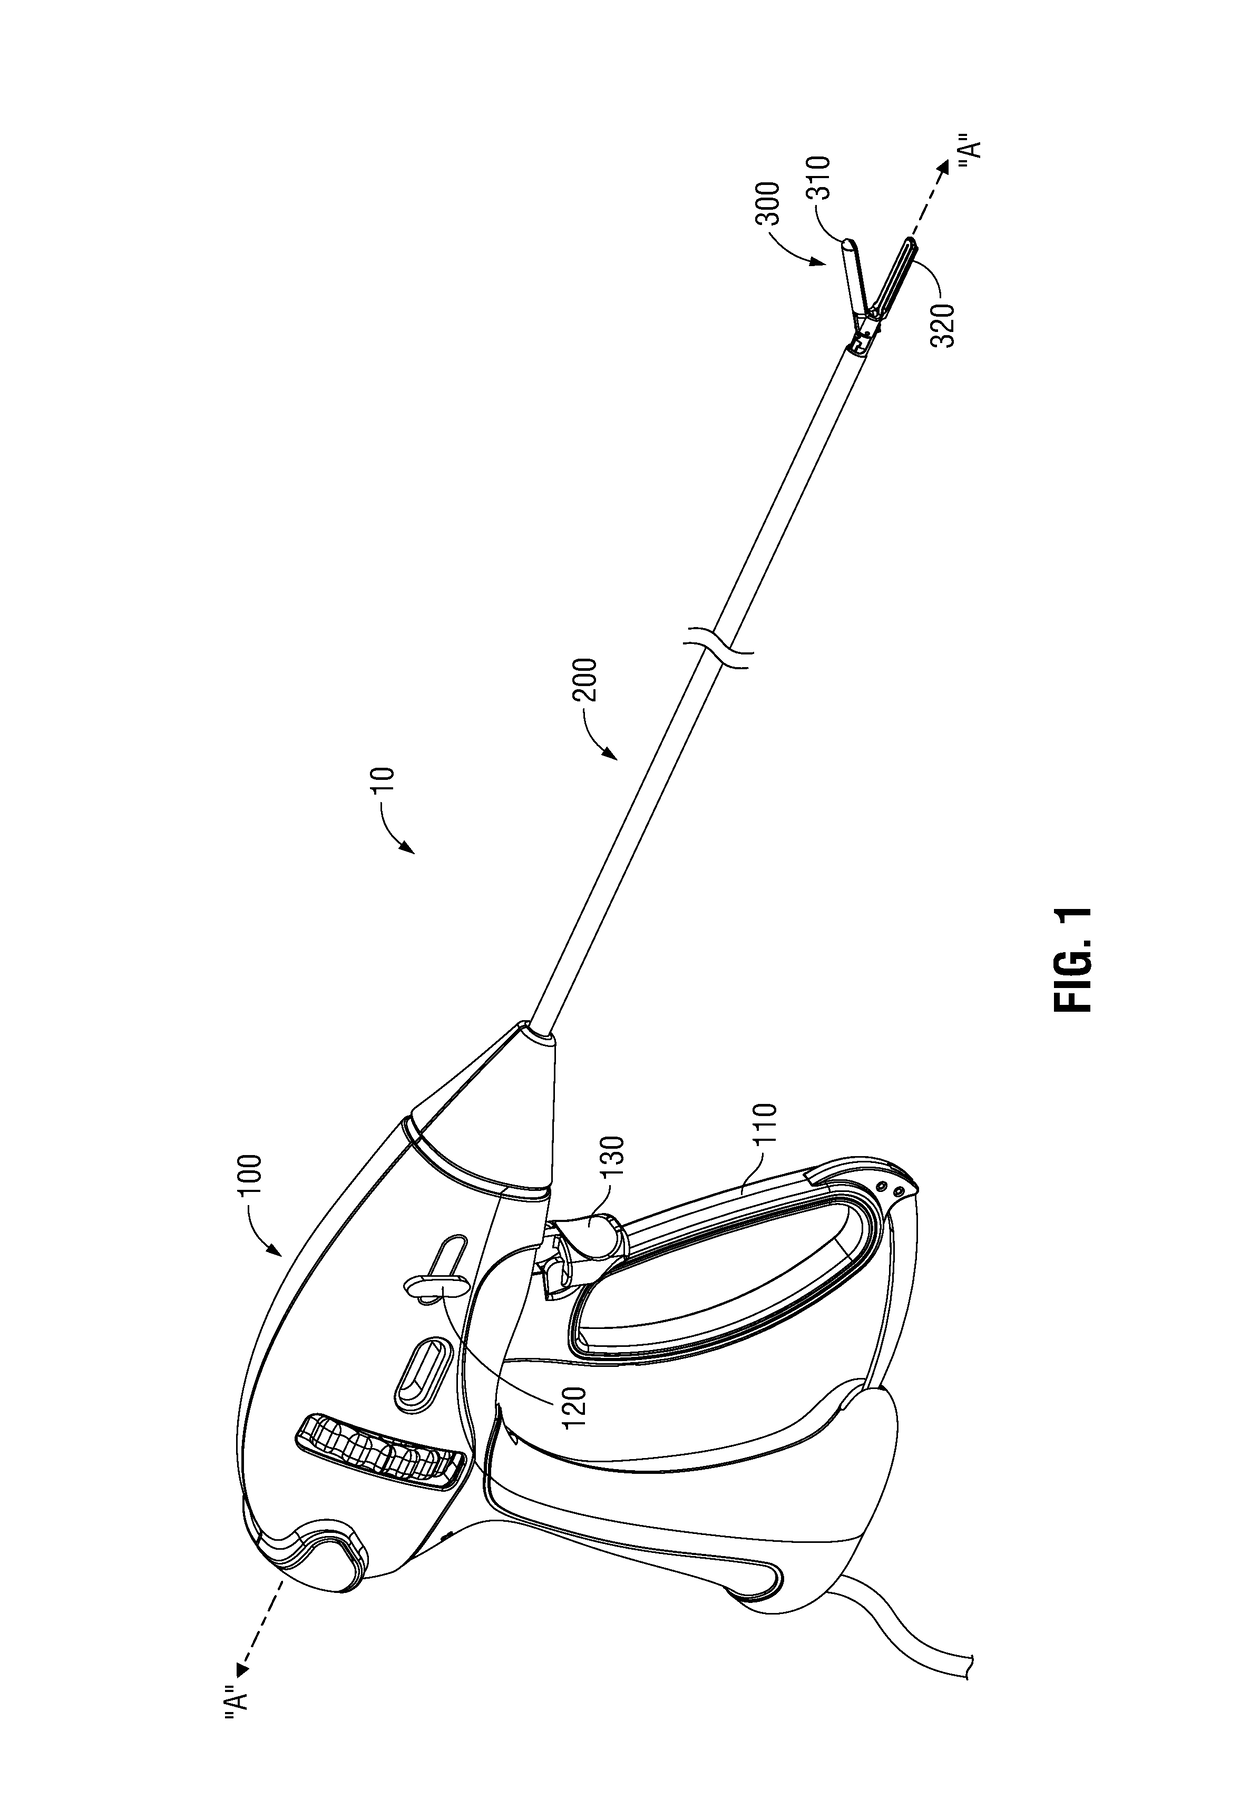 Surgical instruments with force applier and methods of use